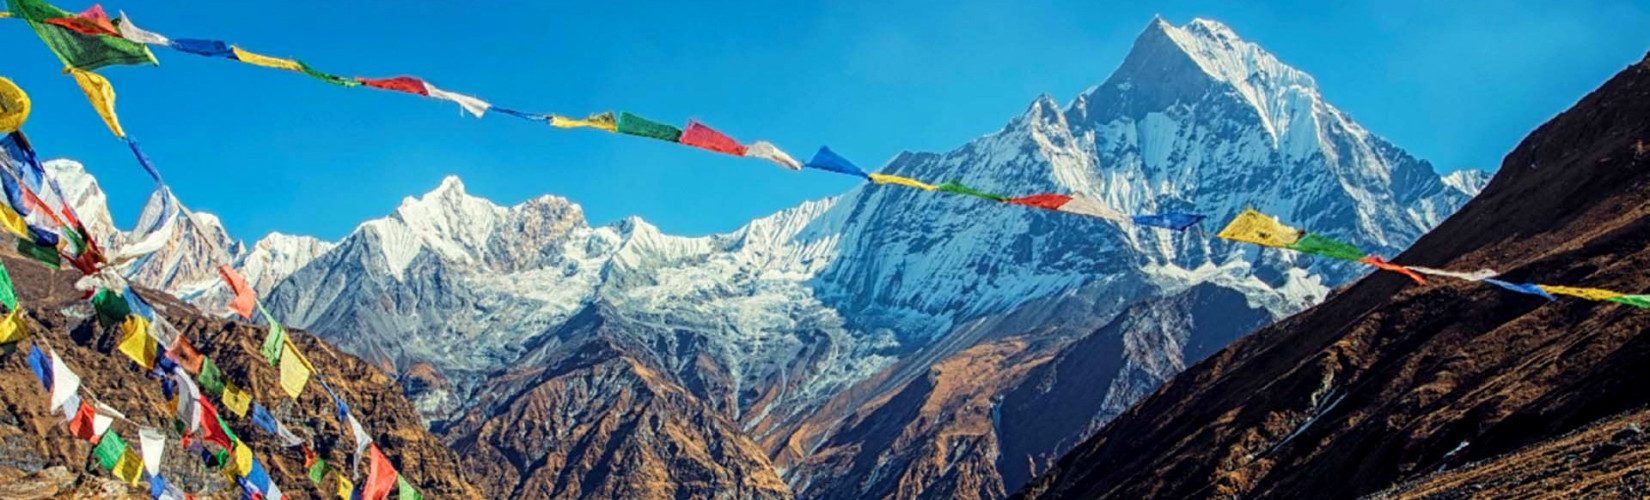 A Complete Guide for Annapurna Base Camp Trek